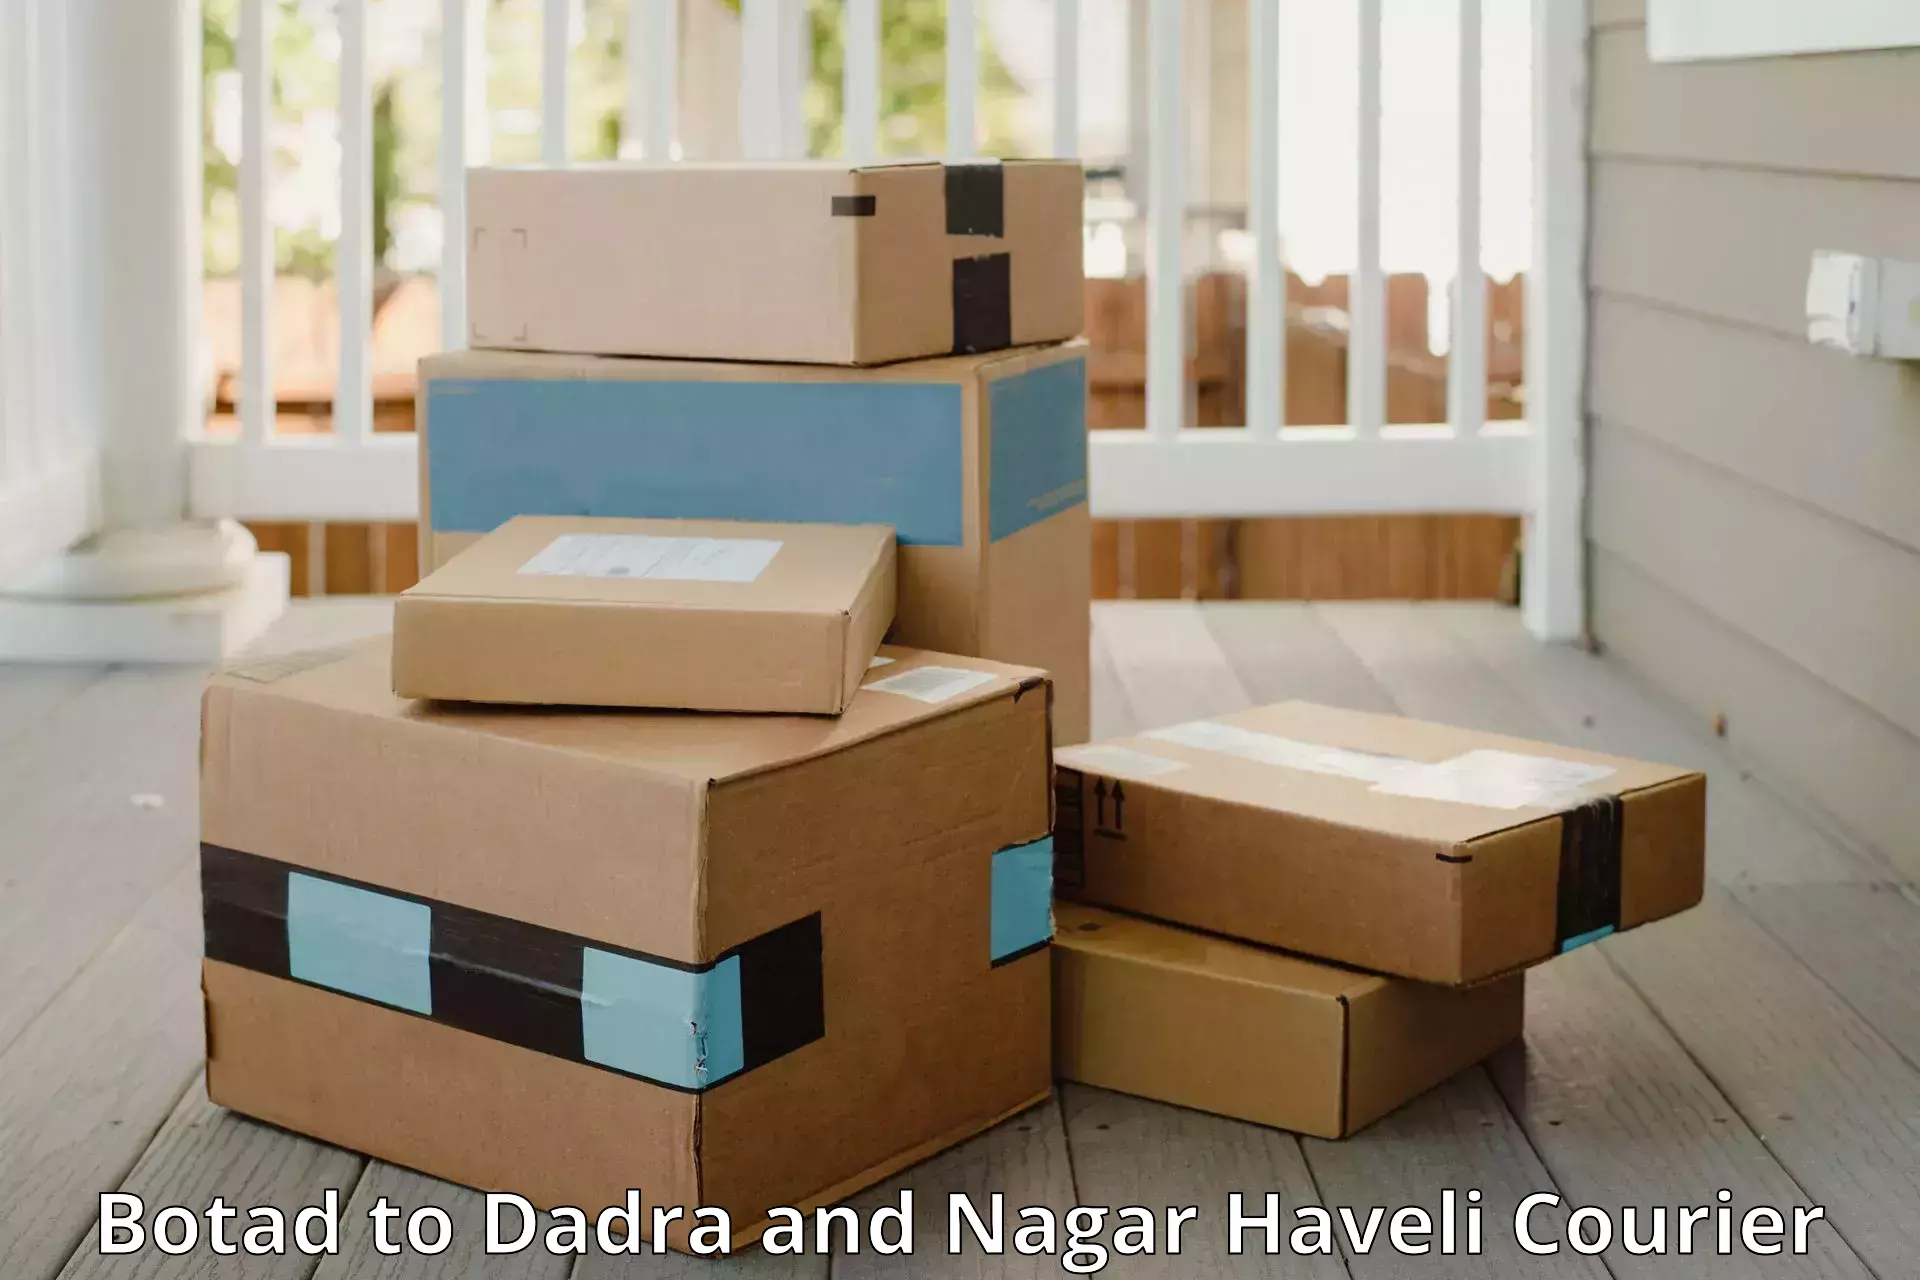 Baggage transport cost in Botad to Dadra and Nagar Haveli